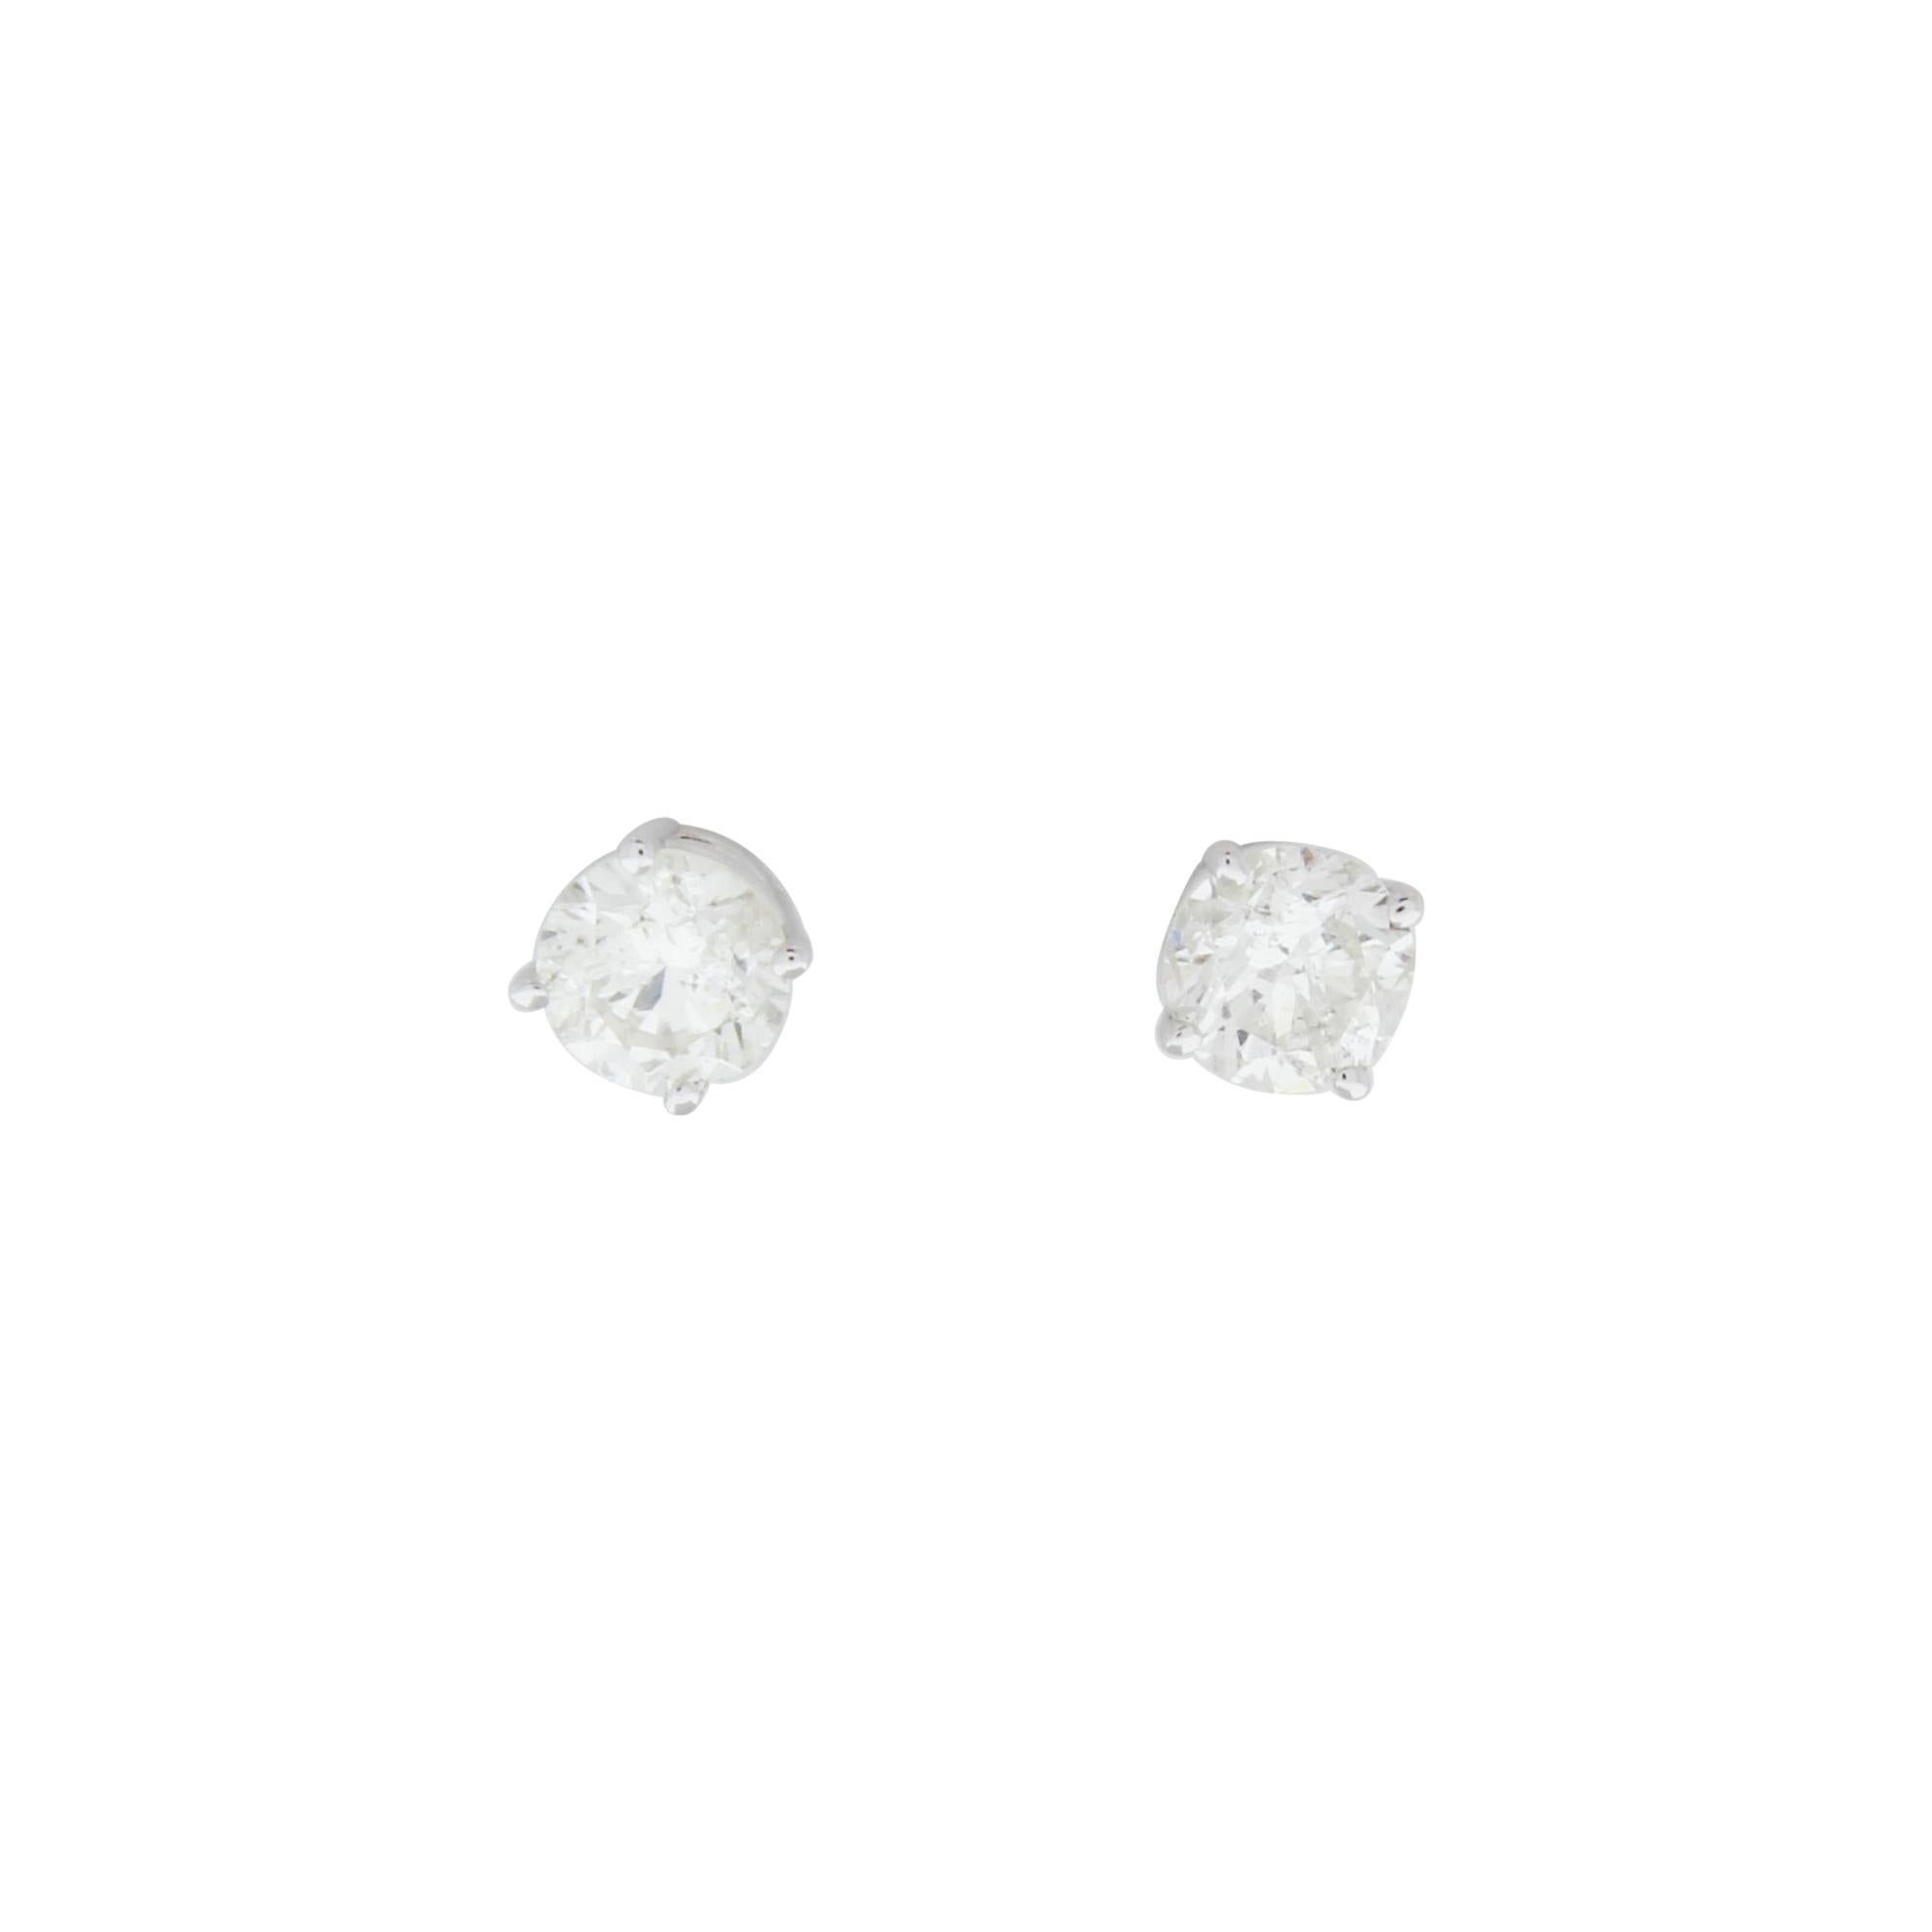 Stunning 14 Karat white gold handmade earrings featuring 2 round brilliant cut diamonds weighing 1.25 carat total I-J color and I1 clarity. These gorgeous earrings are classic and timelessly elegant.